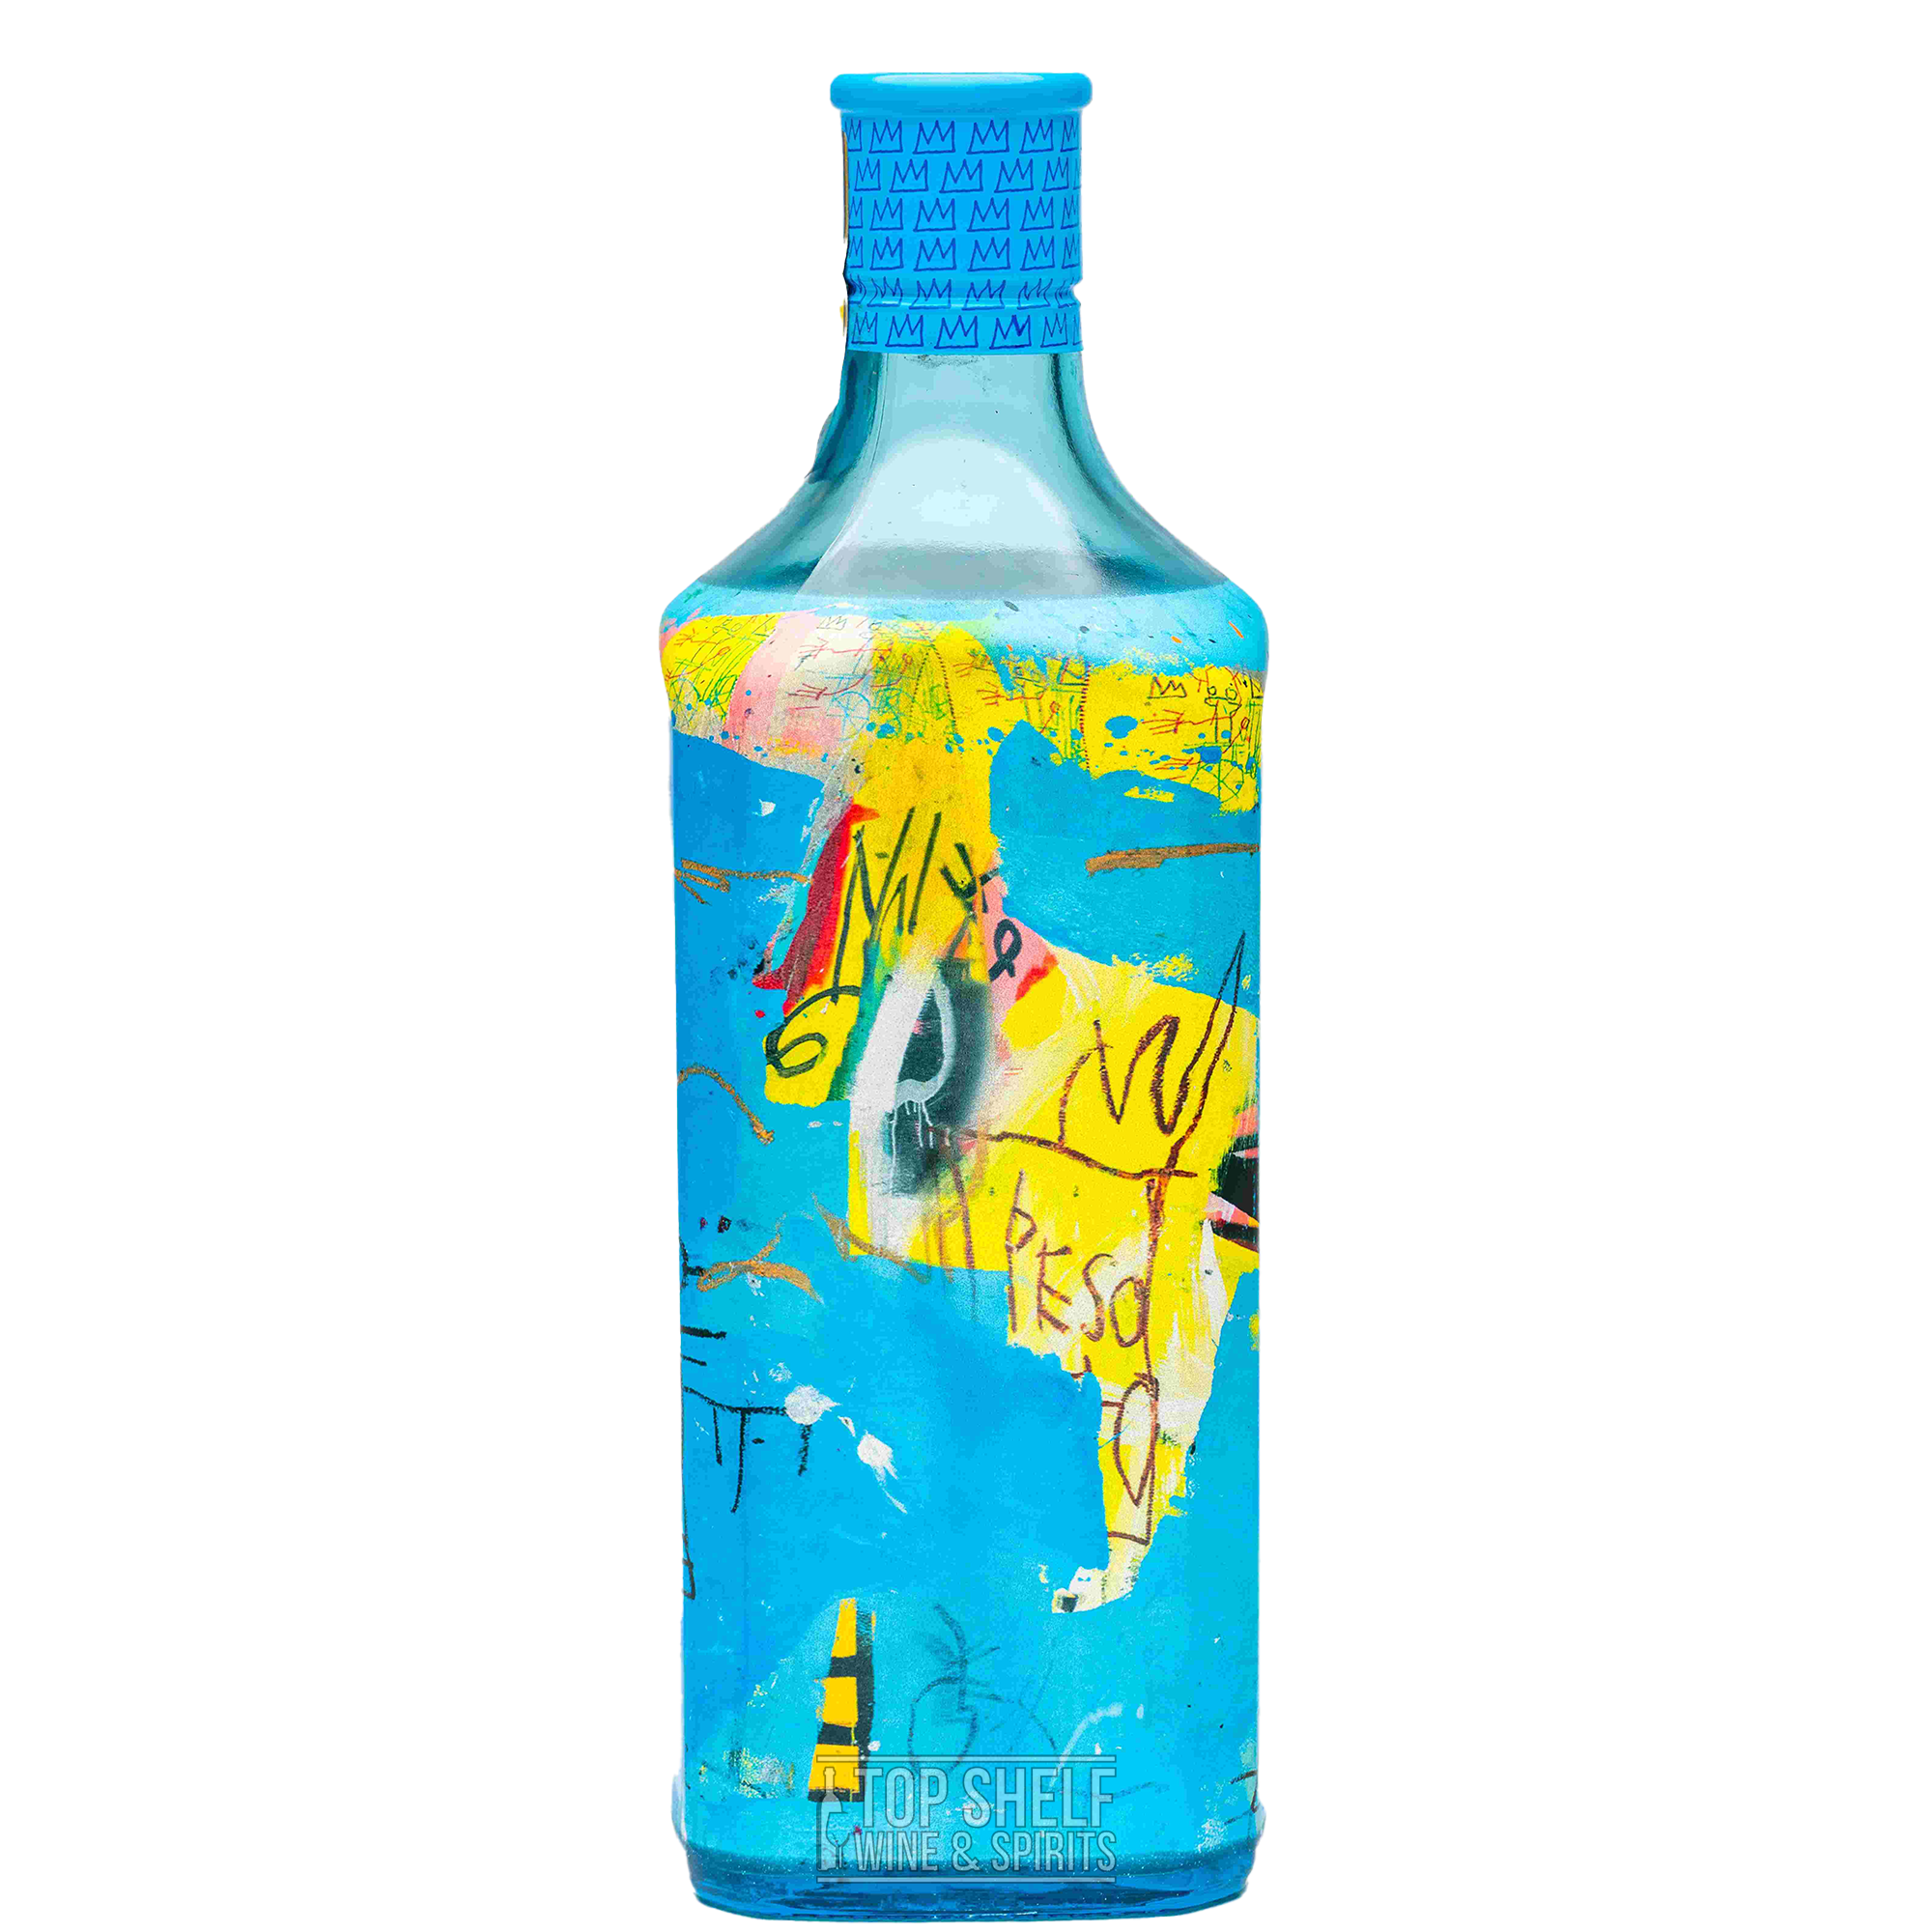 Bombay Sapphire Basquiat London Dry Gin (Special Edition Art)